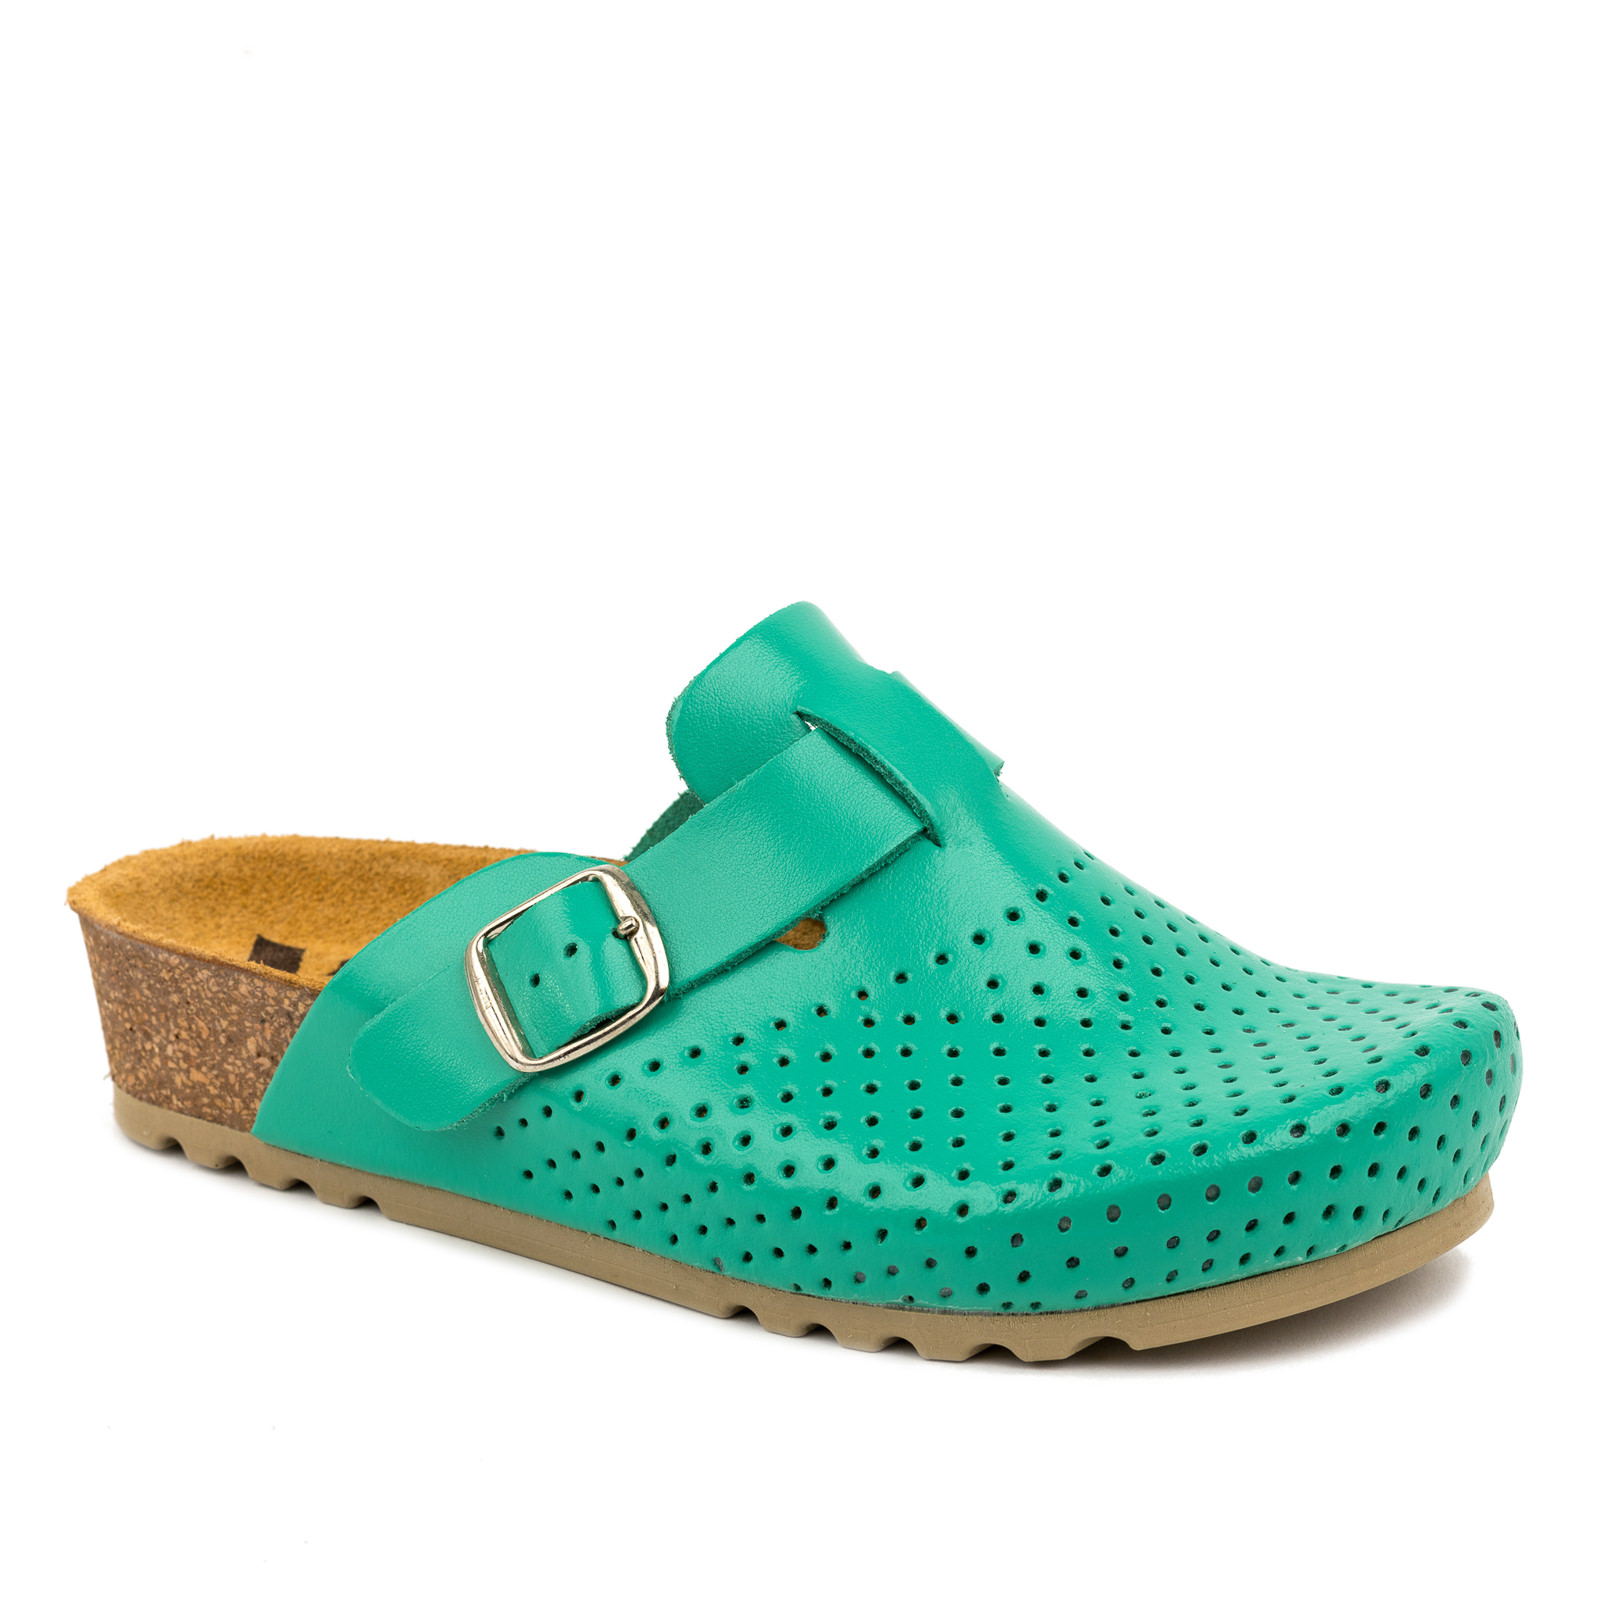 LEATHER ANATOMIC CLOGS WITH VELCRO BAND - GREEN